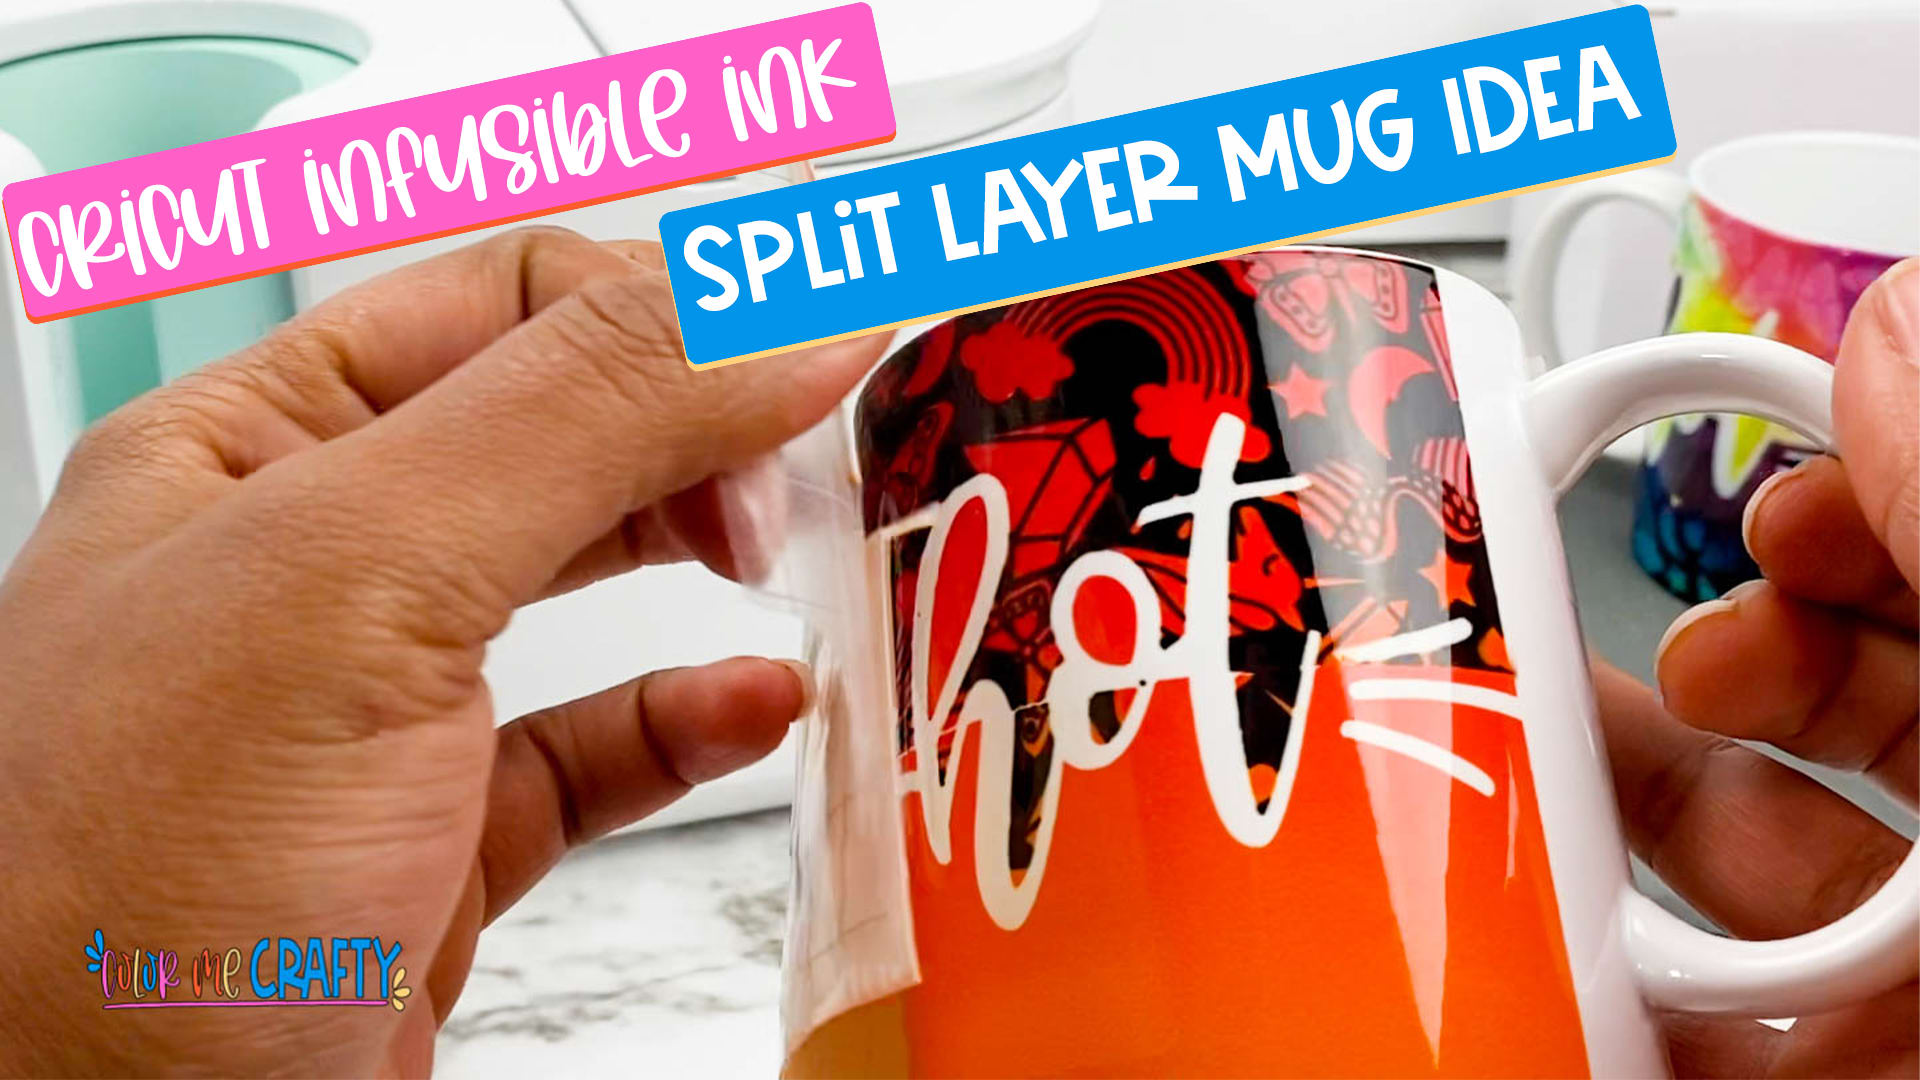 Can You Layer Infusible Ink? The Results Are Amazing! - Color Me Crafty